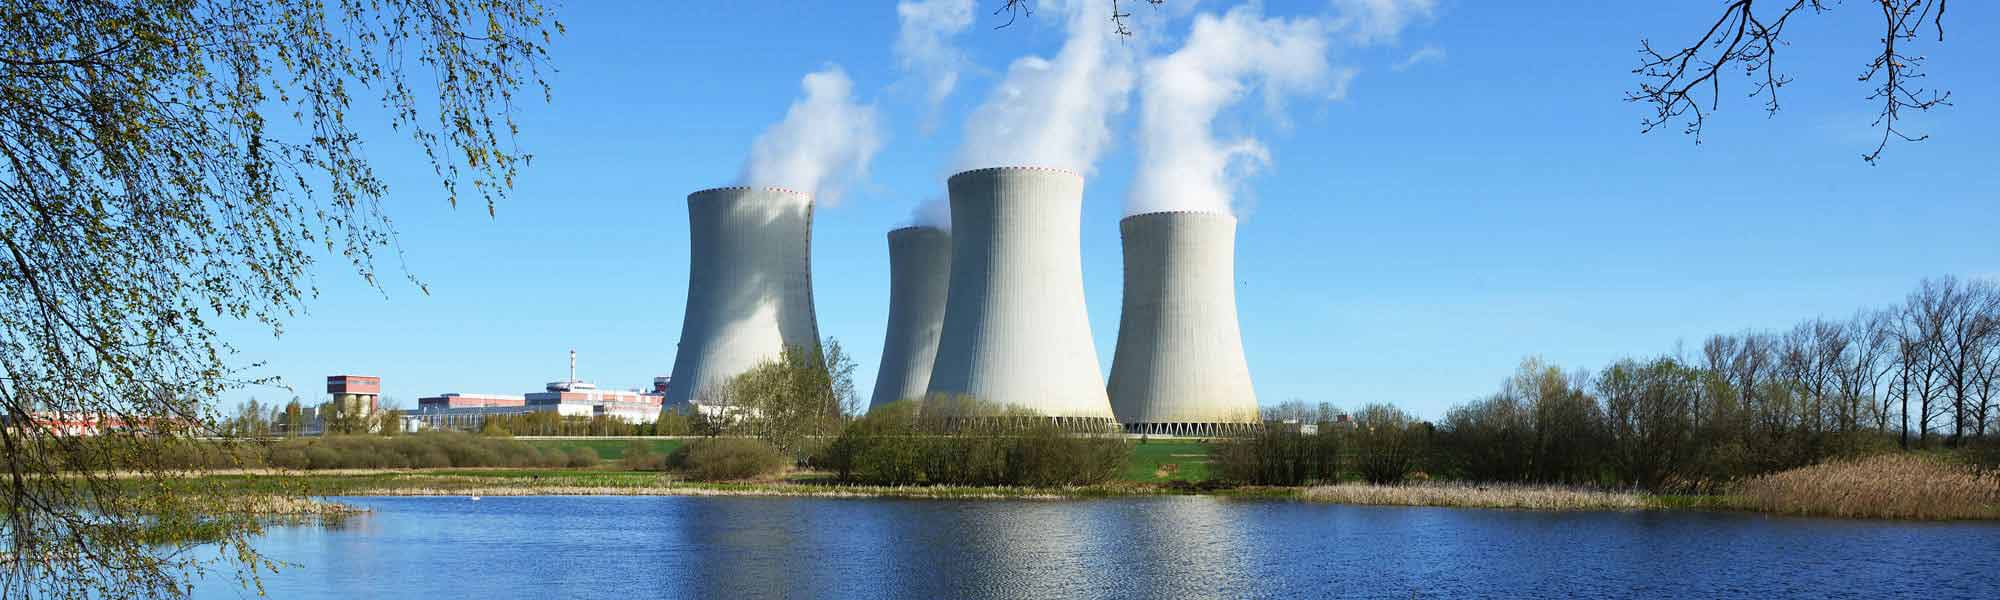 Fiber optic solutions for the nuclear industry